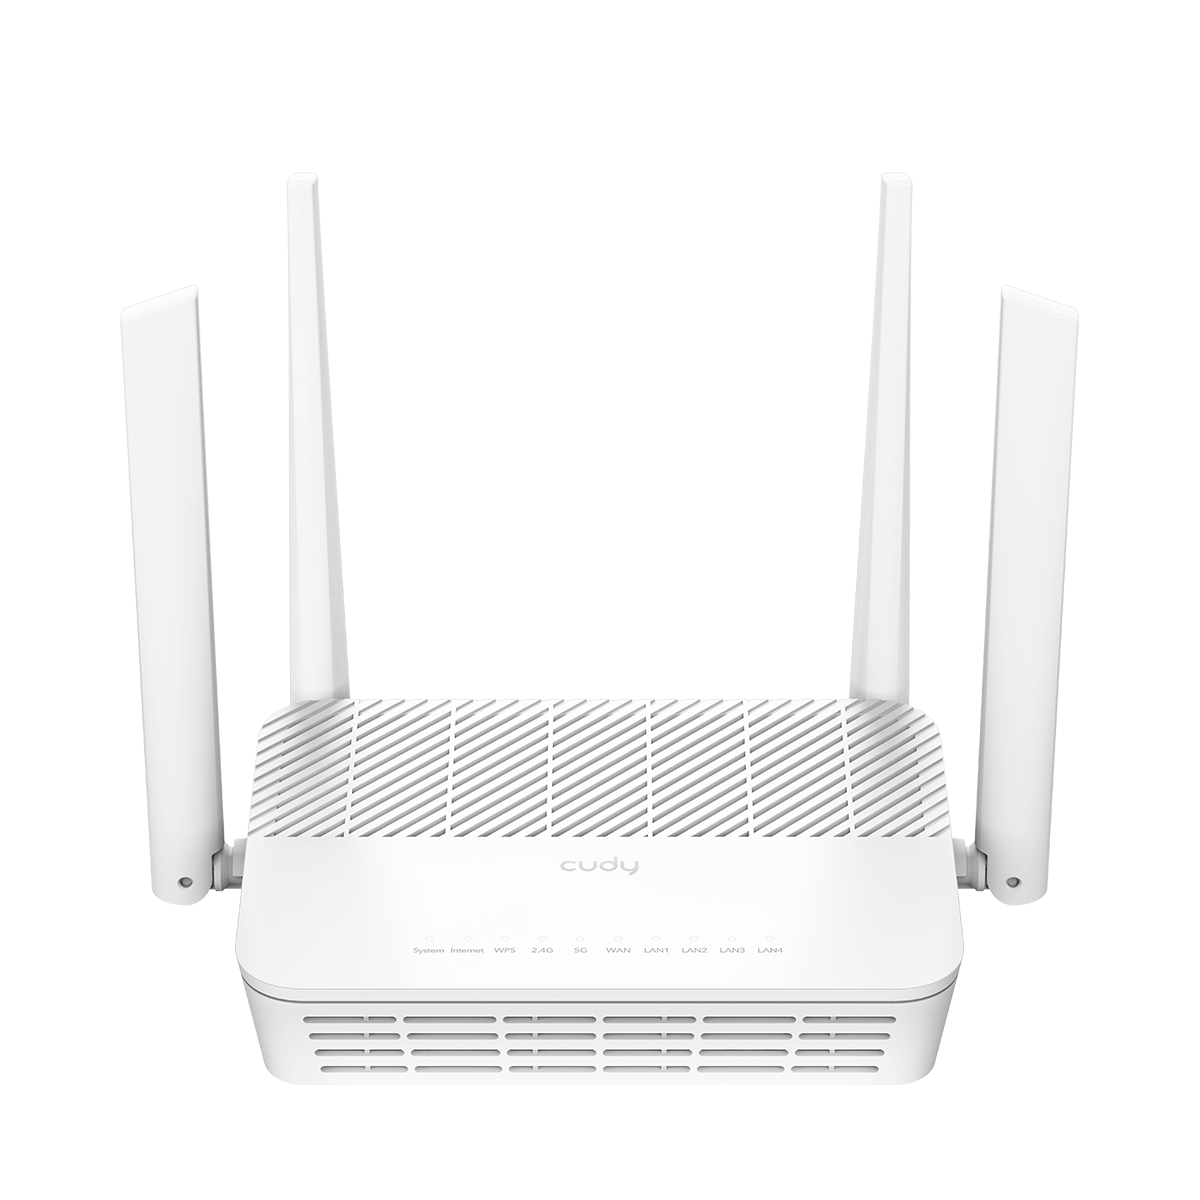 AX3000 2.5G Mesh Wi-Fi 6 Router, WR3000H 1.0